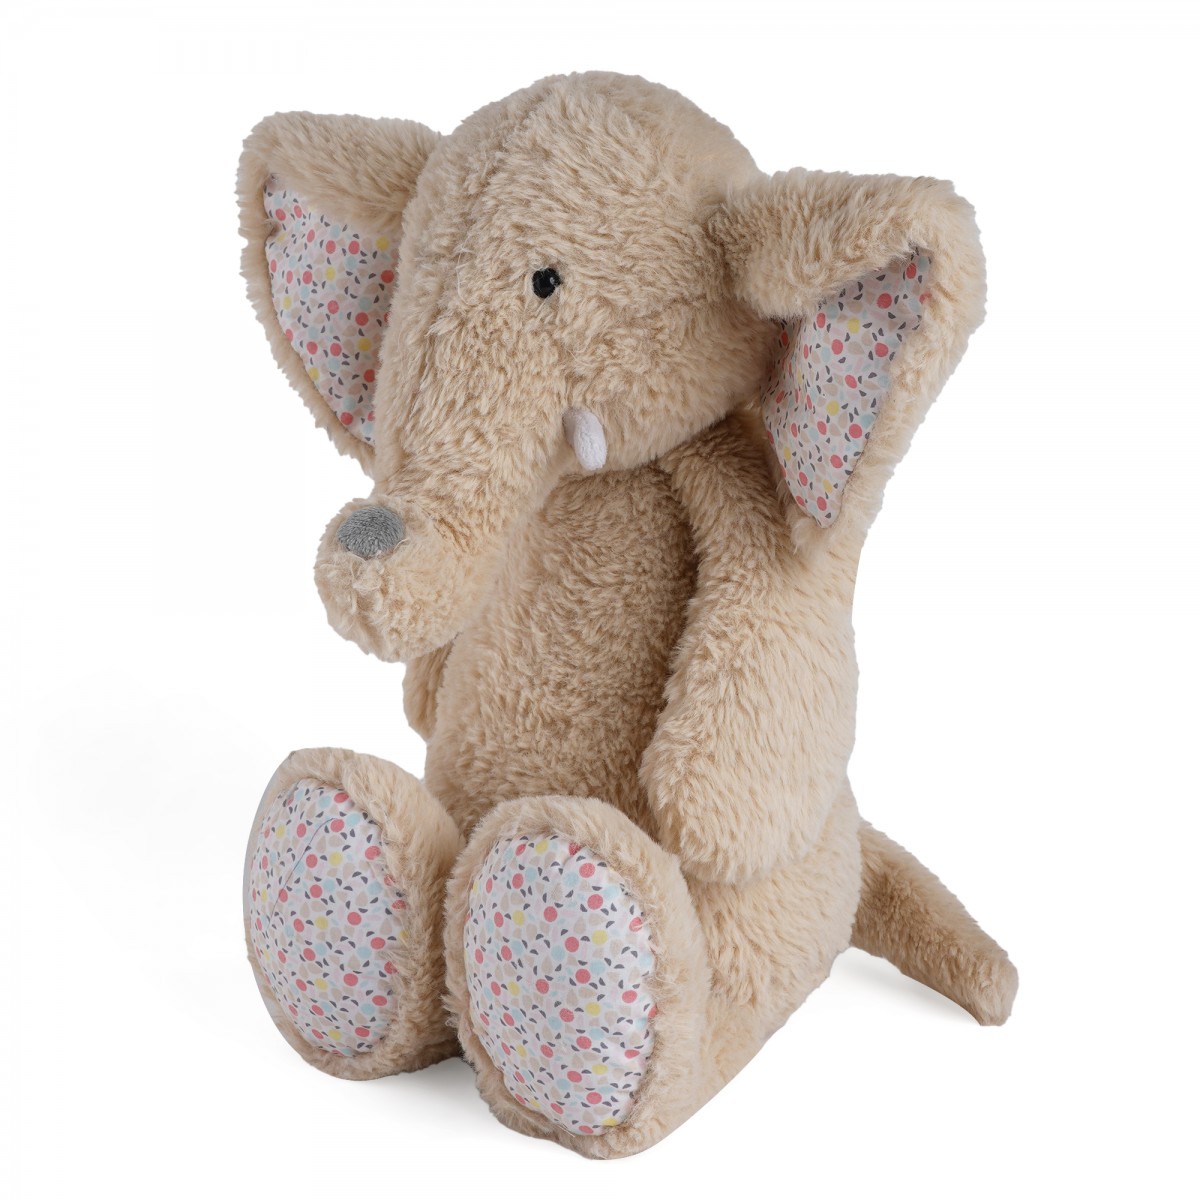 Huggable Cuddly Zoey Elephant Stuffed Toy By Fuzzbuzz, Soft Toys for Kids, Cute Plushies Beige, For Kids Of Age 2 Years & Above